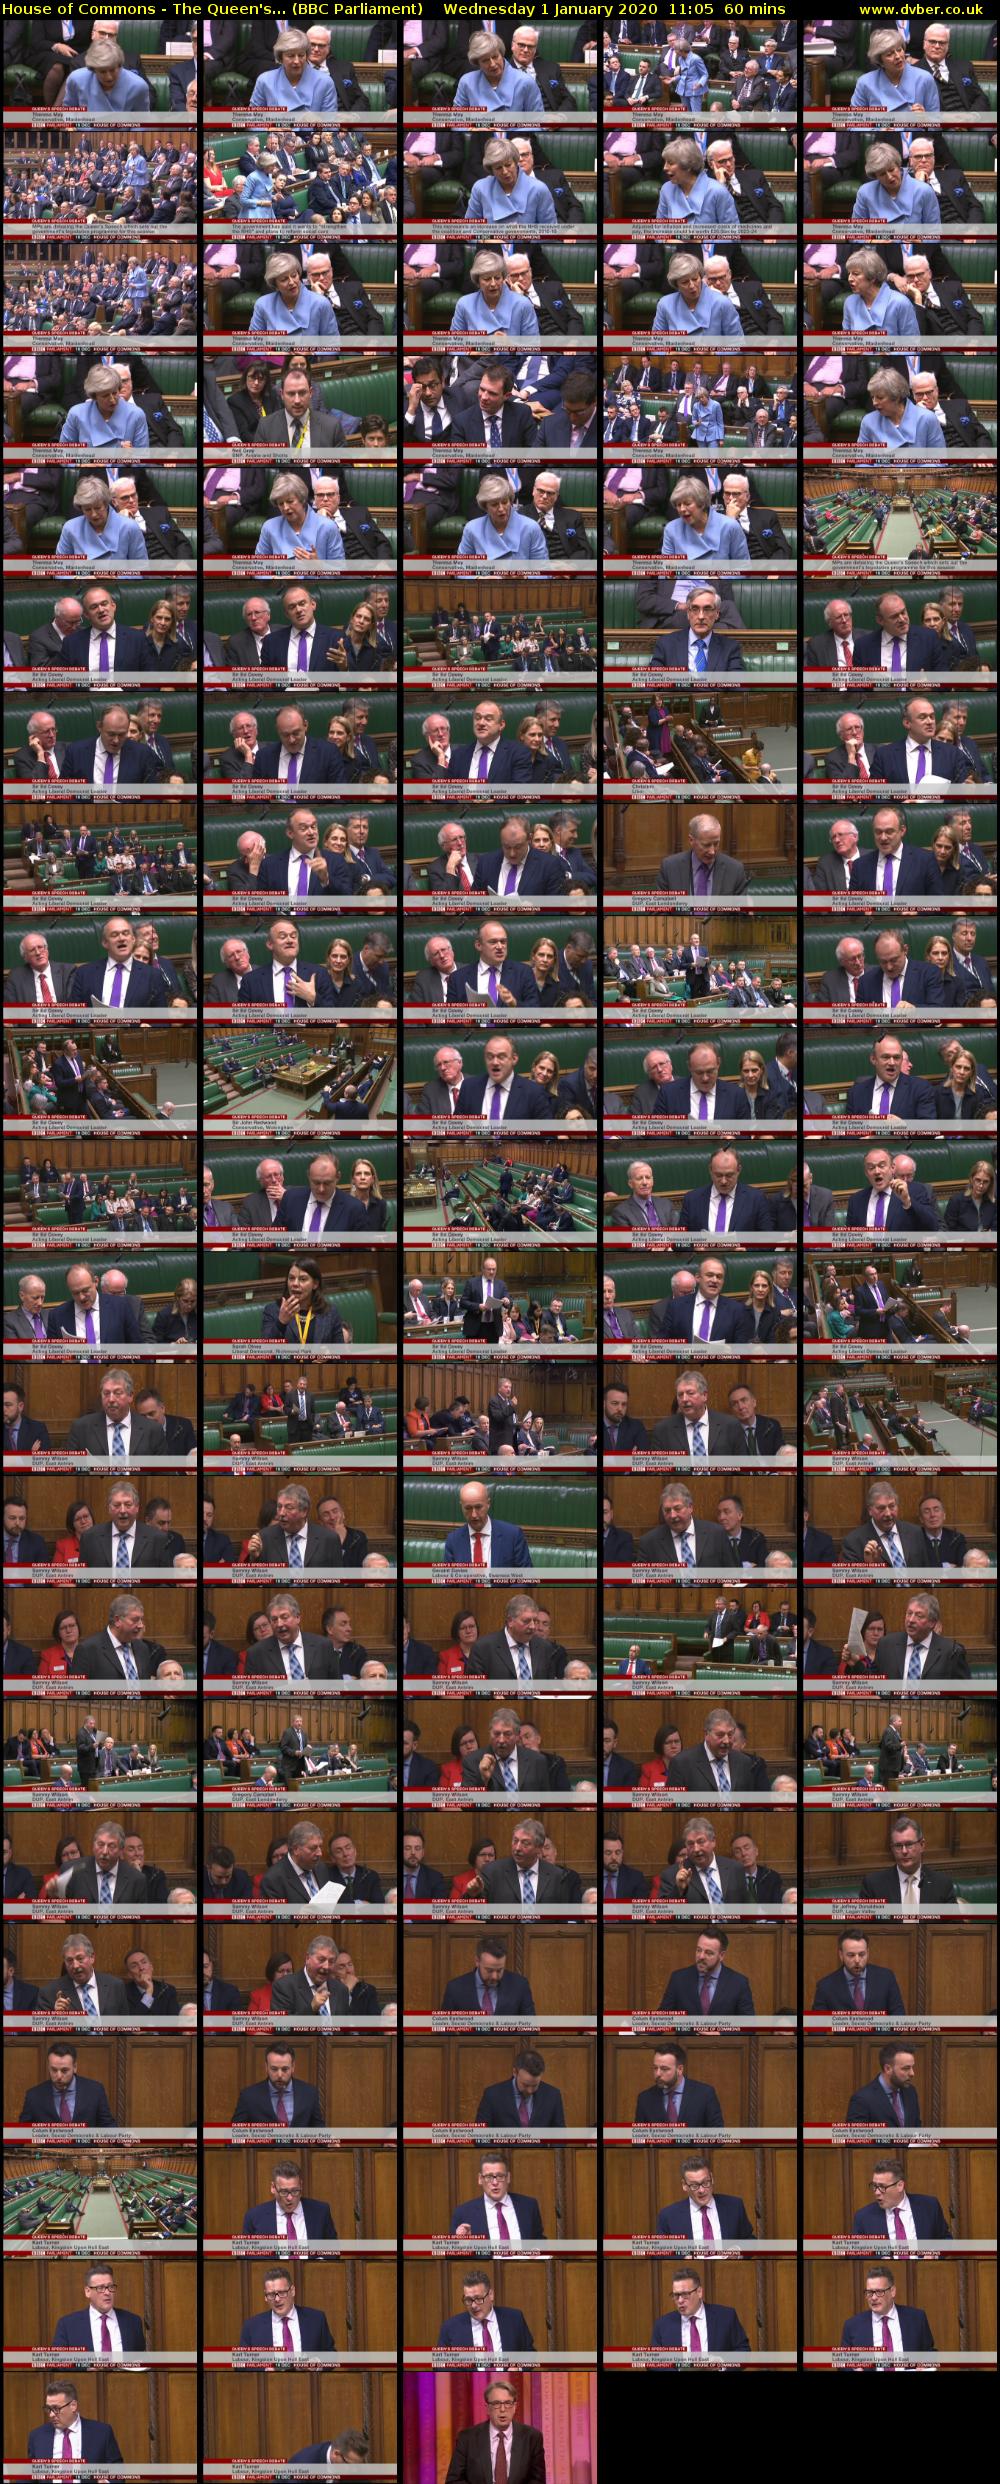 House of Commons - The Queen's... (BBC Parliament) Wednesday 1 January 2020 11:05 - 12:05